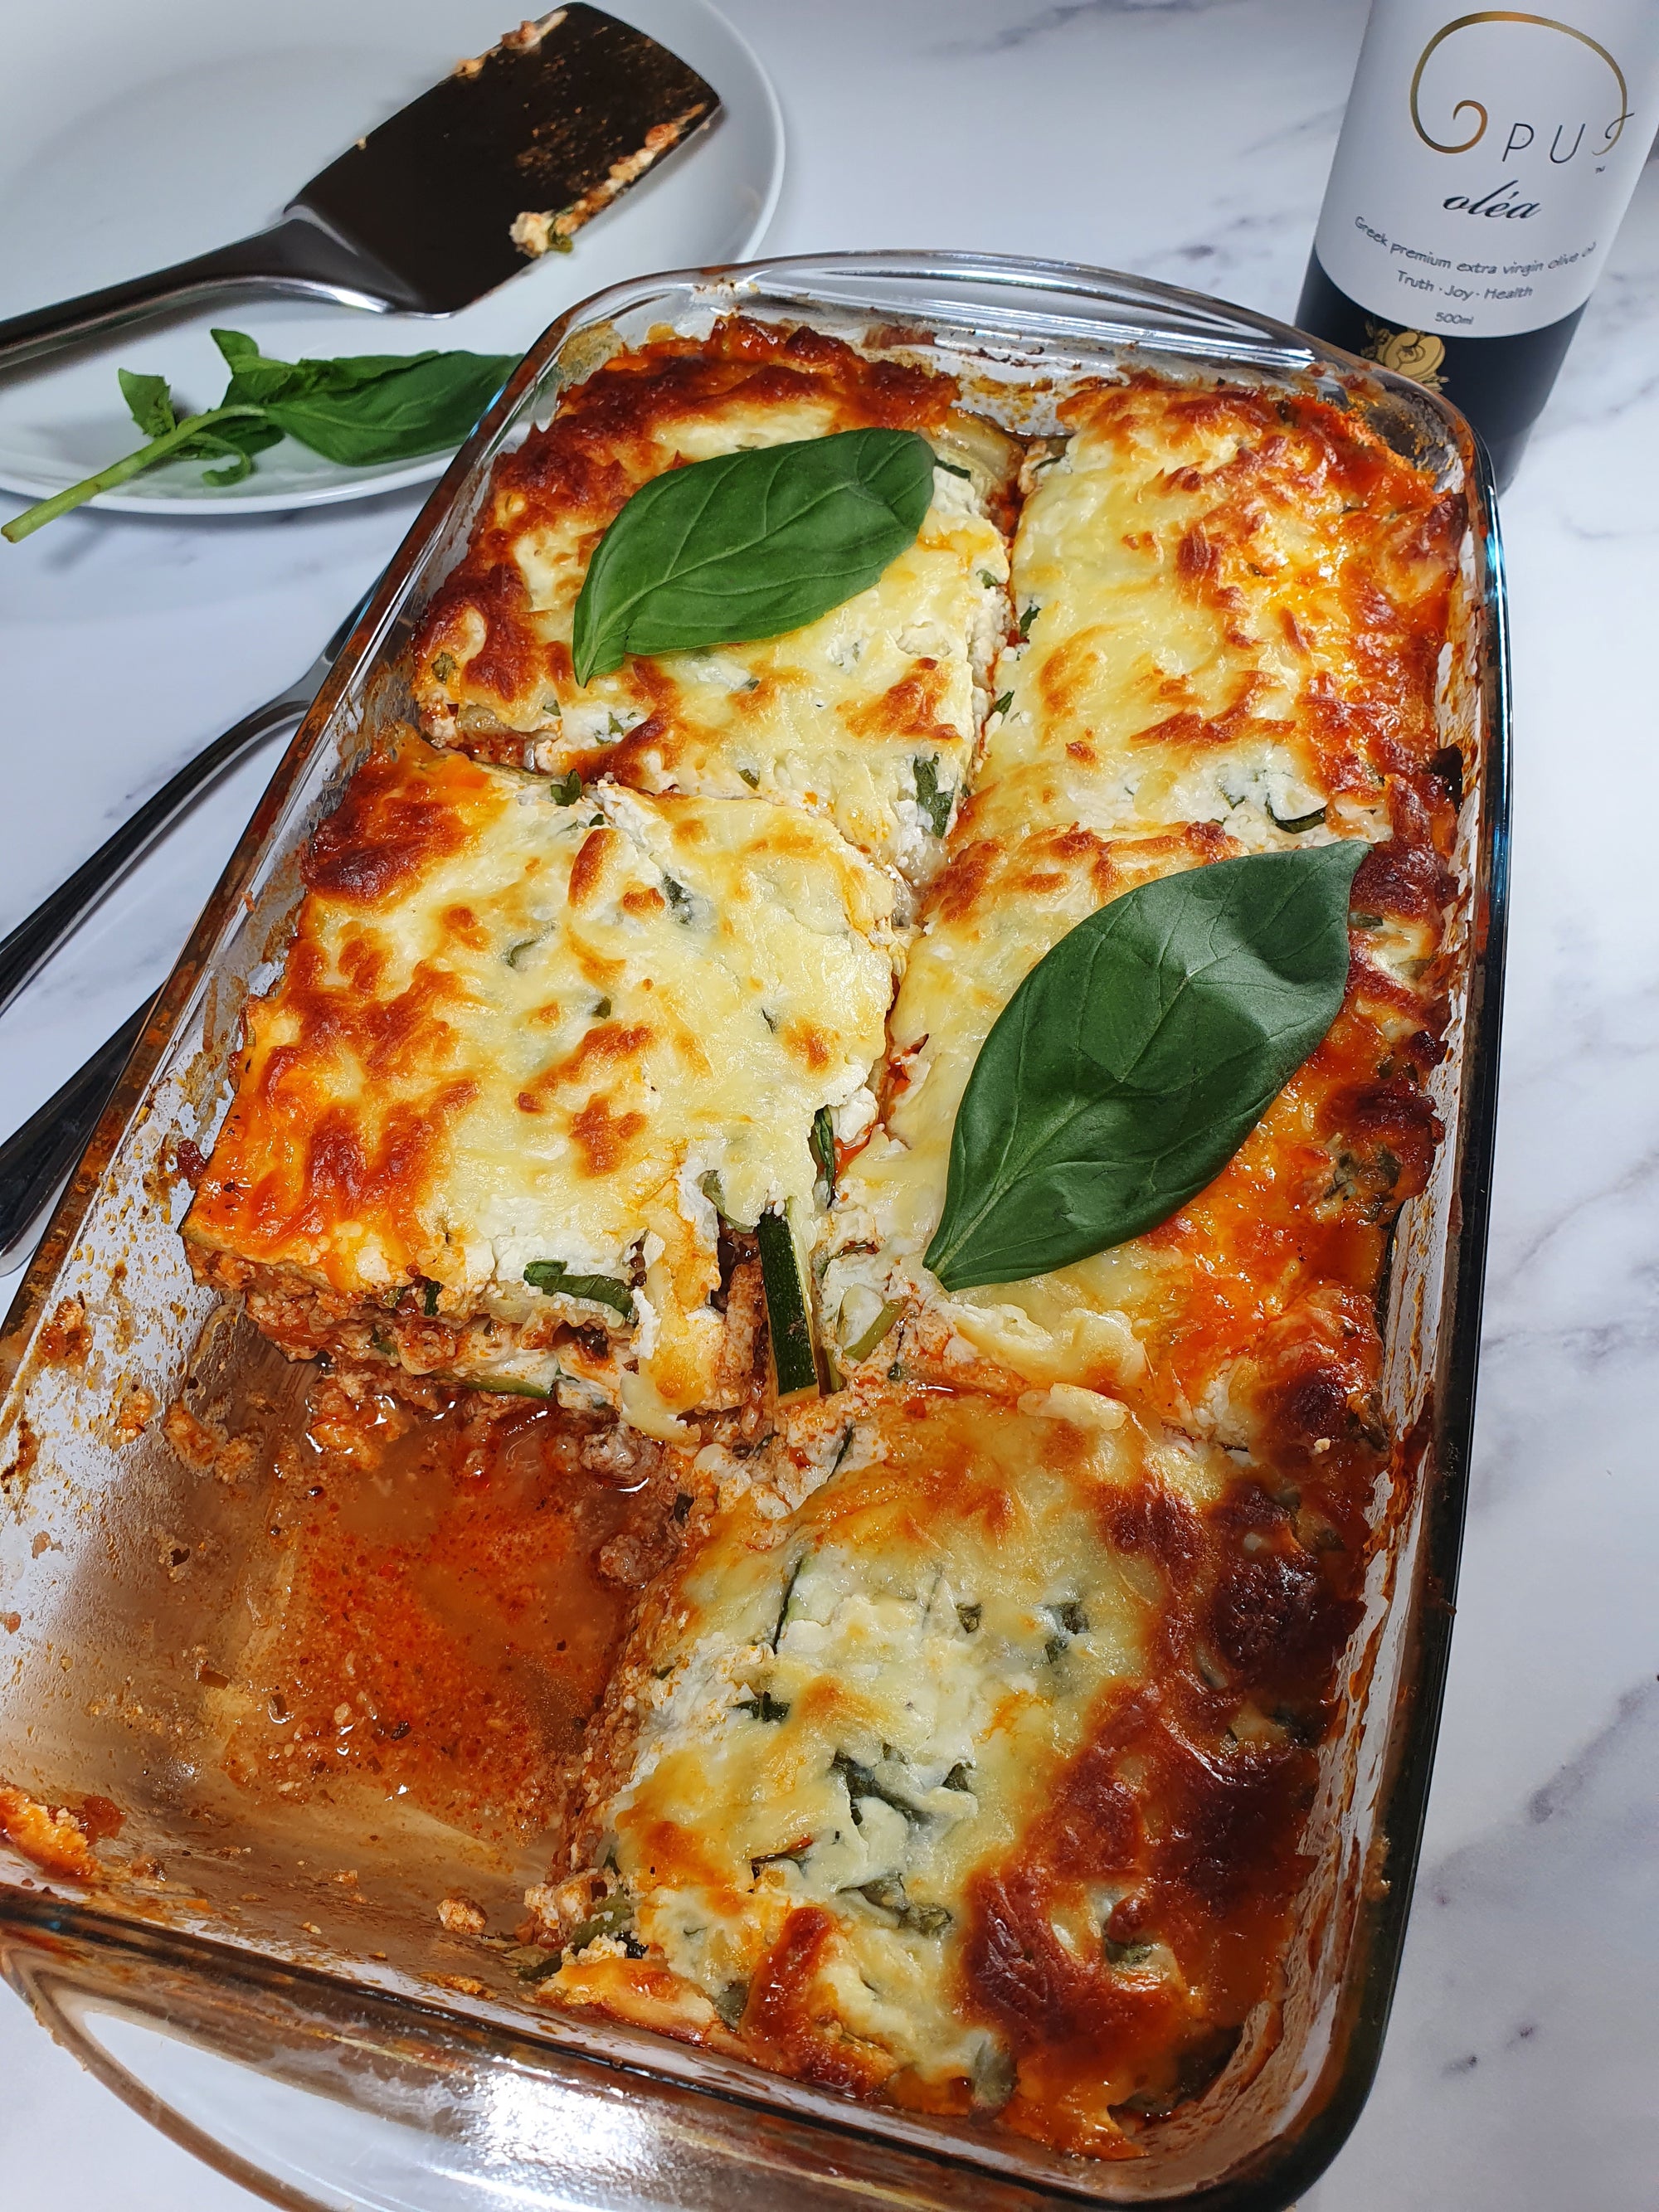 Light and quick lasagna with Opus Olea extra virgin olive oil